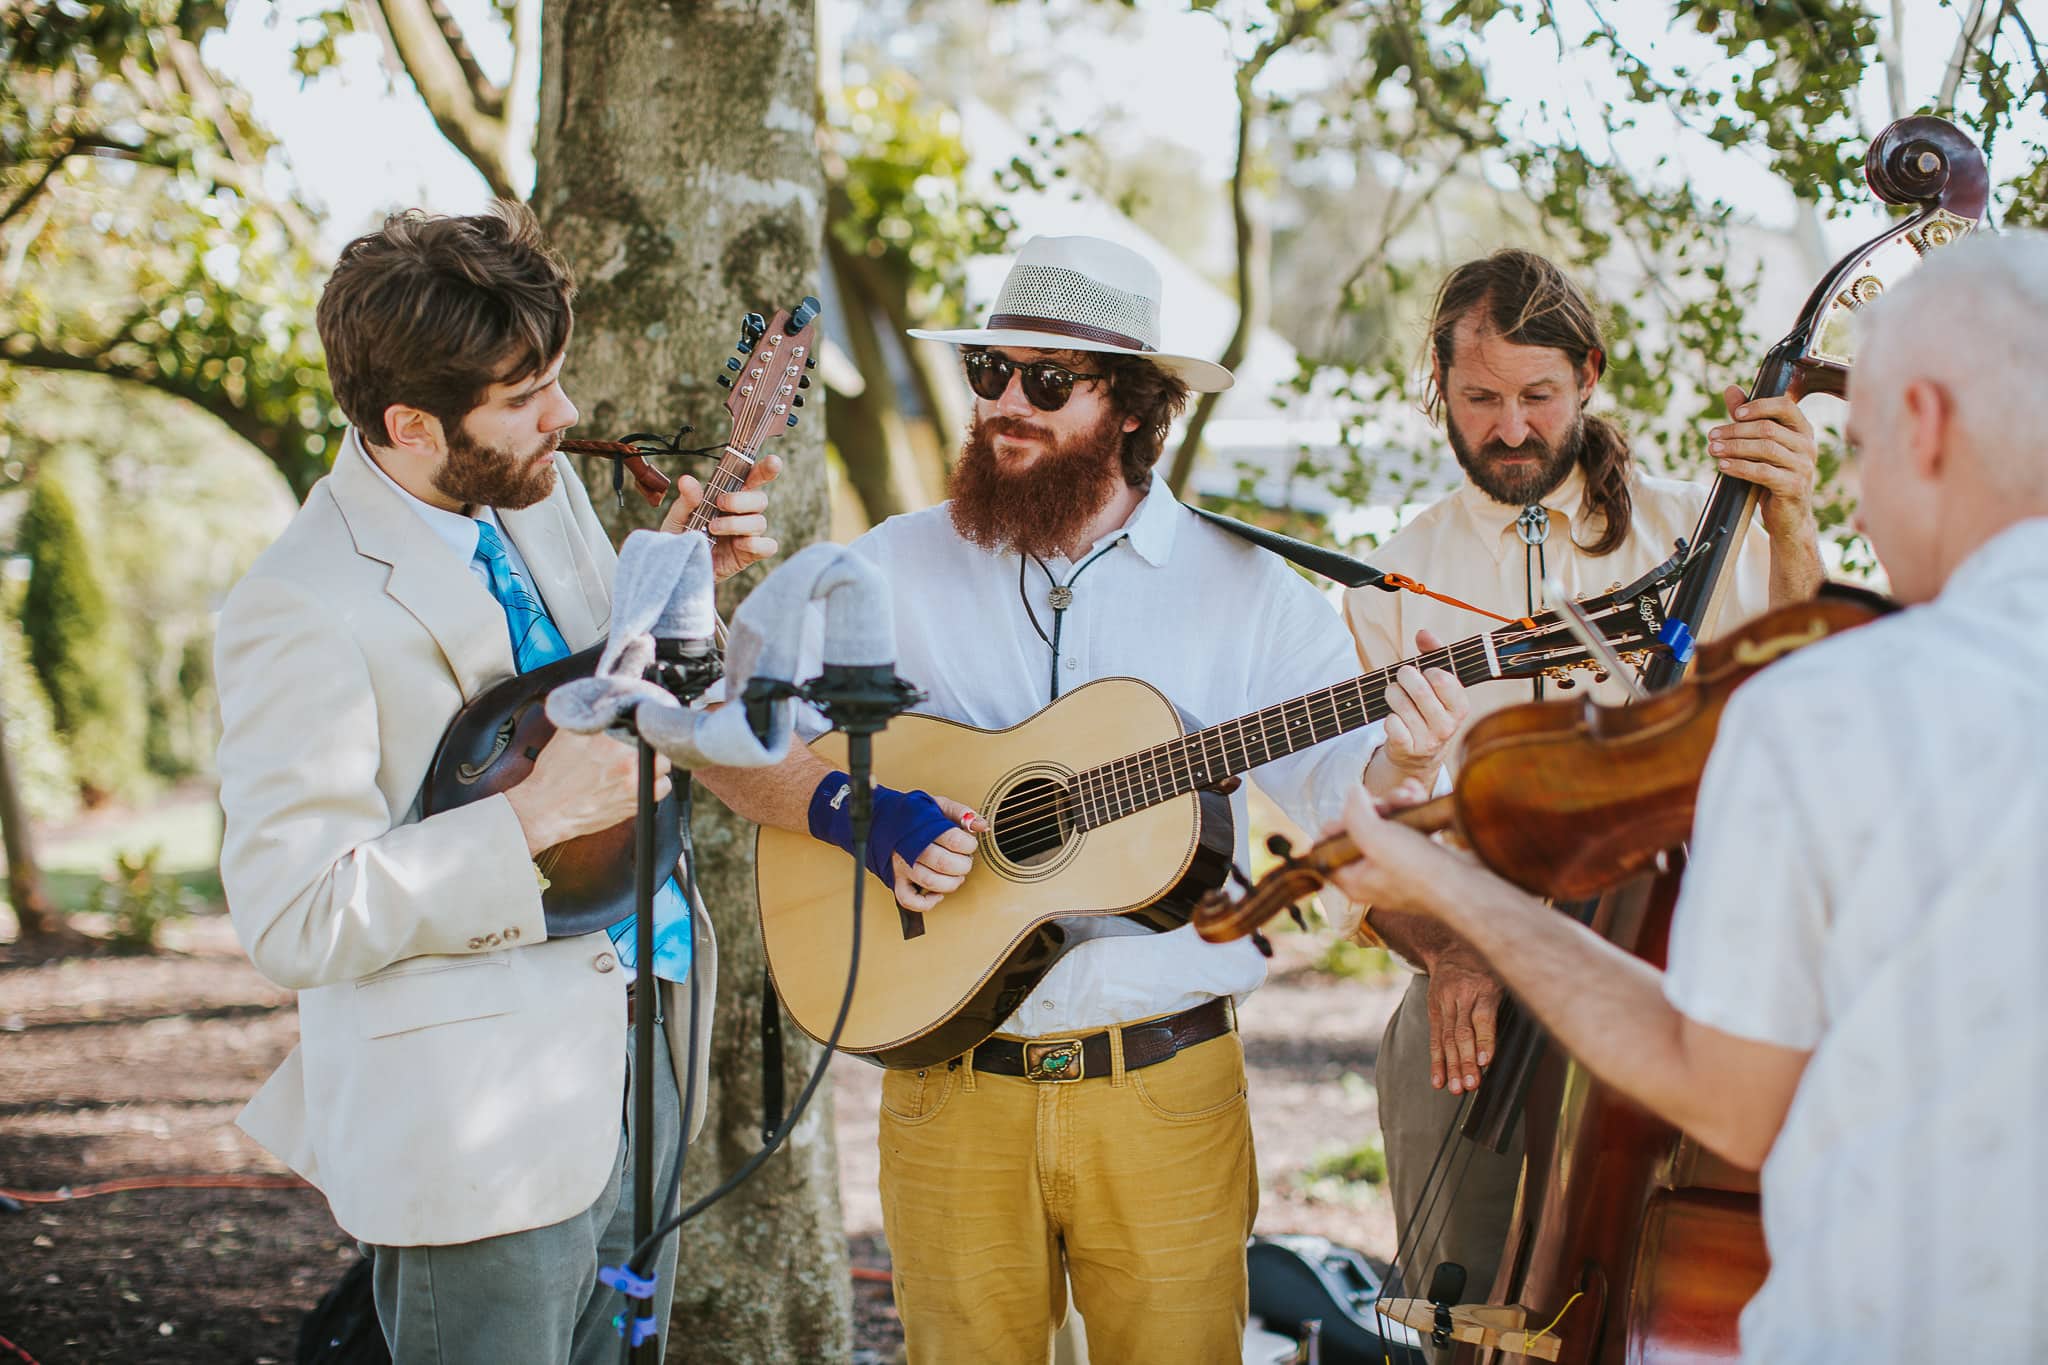 We hired a blue grass 4-piece string band who will play during the ceremony